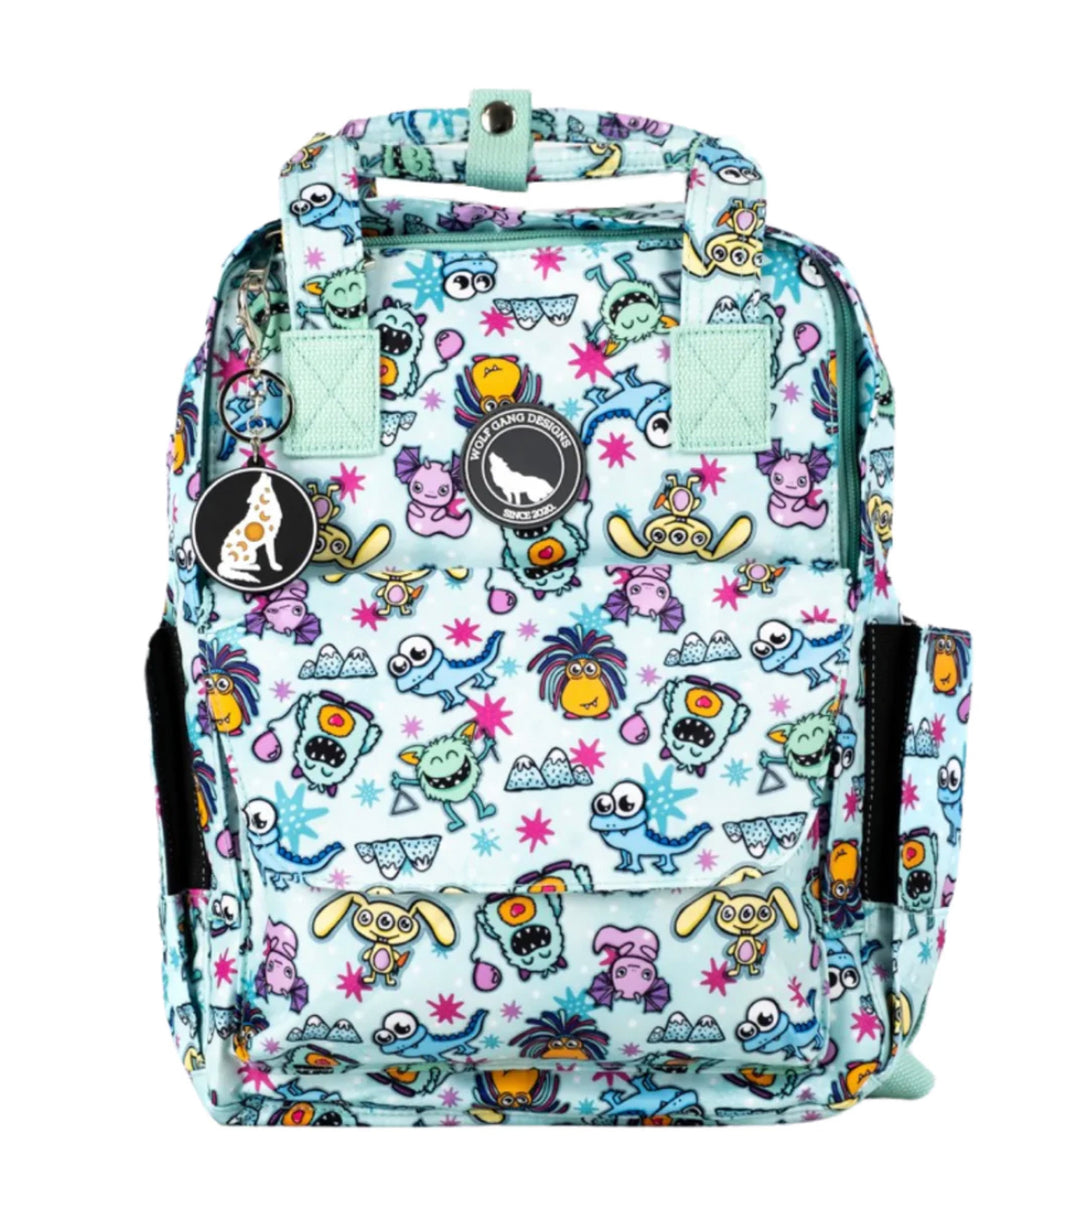 Wolfpack Kids' Backpack - Love at First Fright